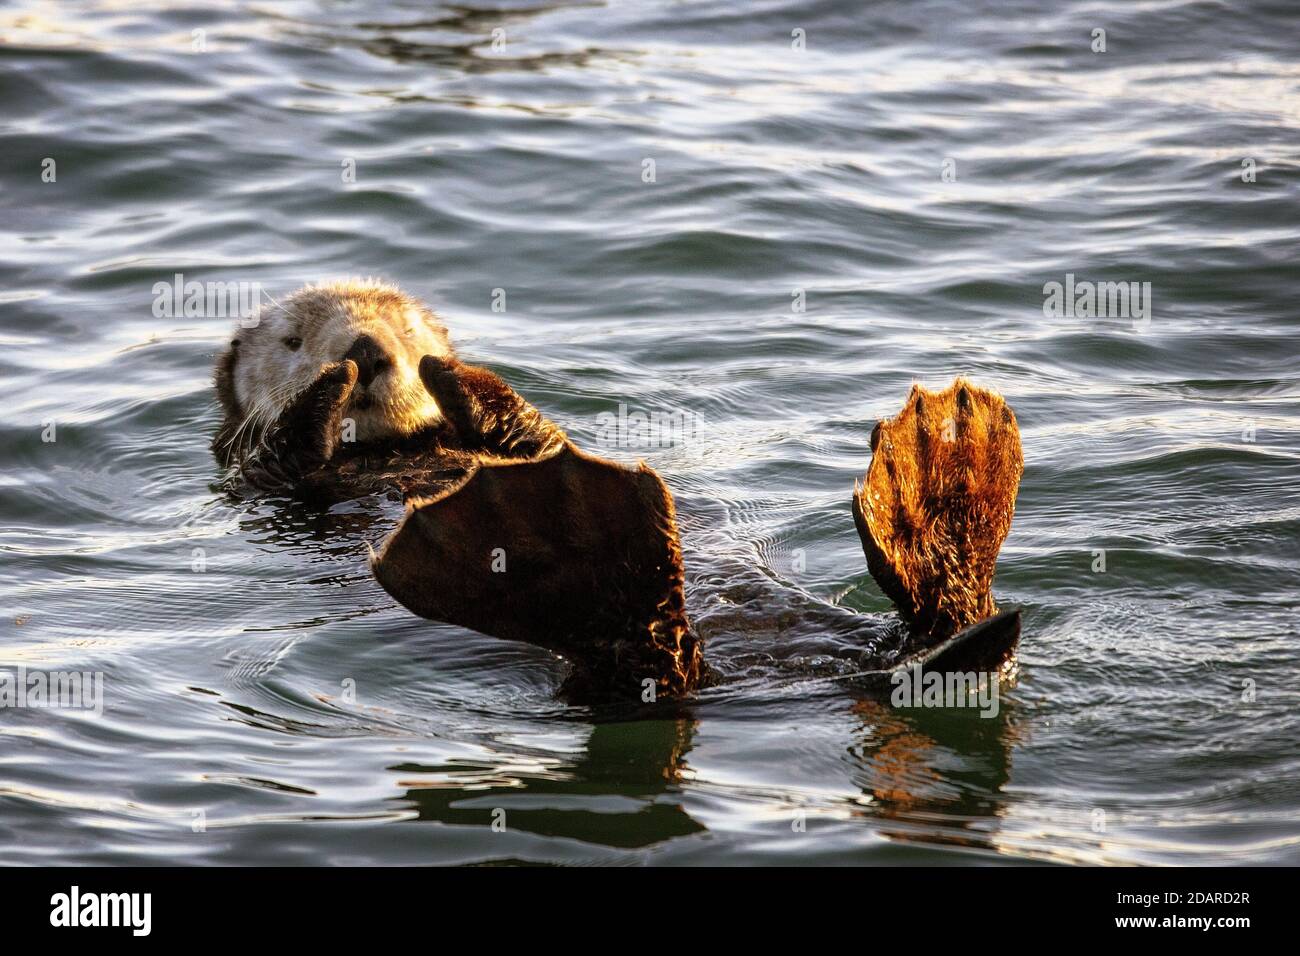 A Sea Otter (Enhydra lutris) floating in the Elkhorn Slough, Moss Landing, California Stock Photo